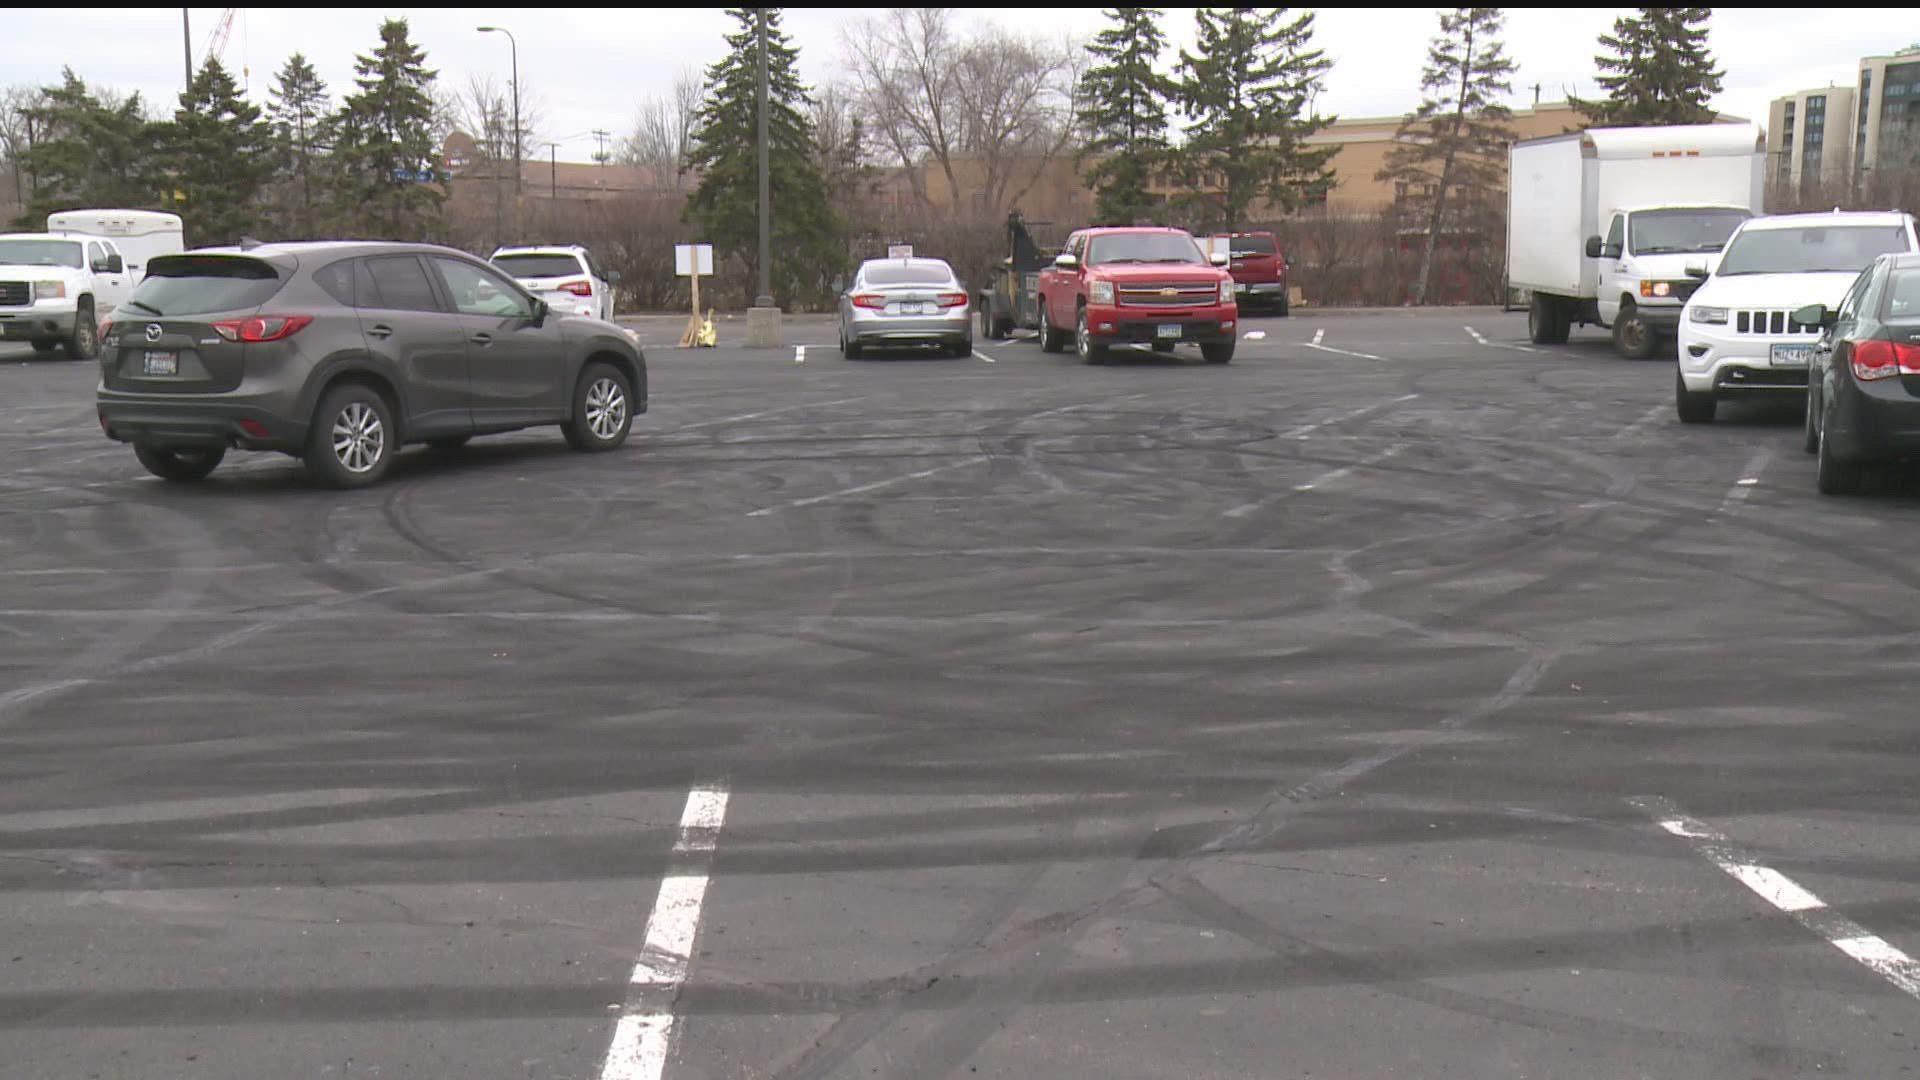 Residents around Excelsior and West Bde Maka Ska Boulevards say a busy parking lot during the day is the latest location to attract hotrodders at night.